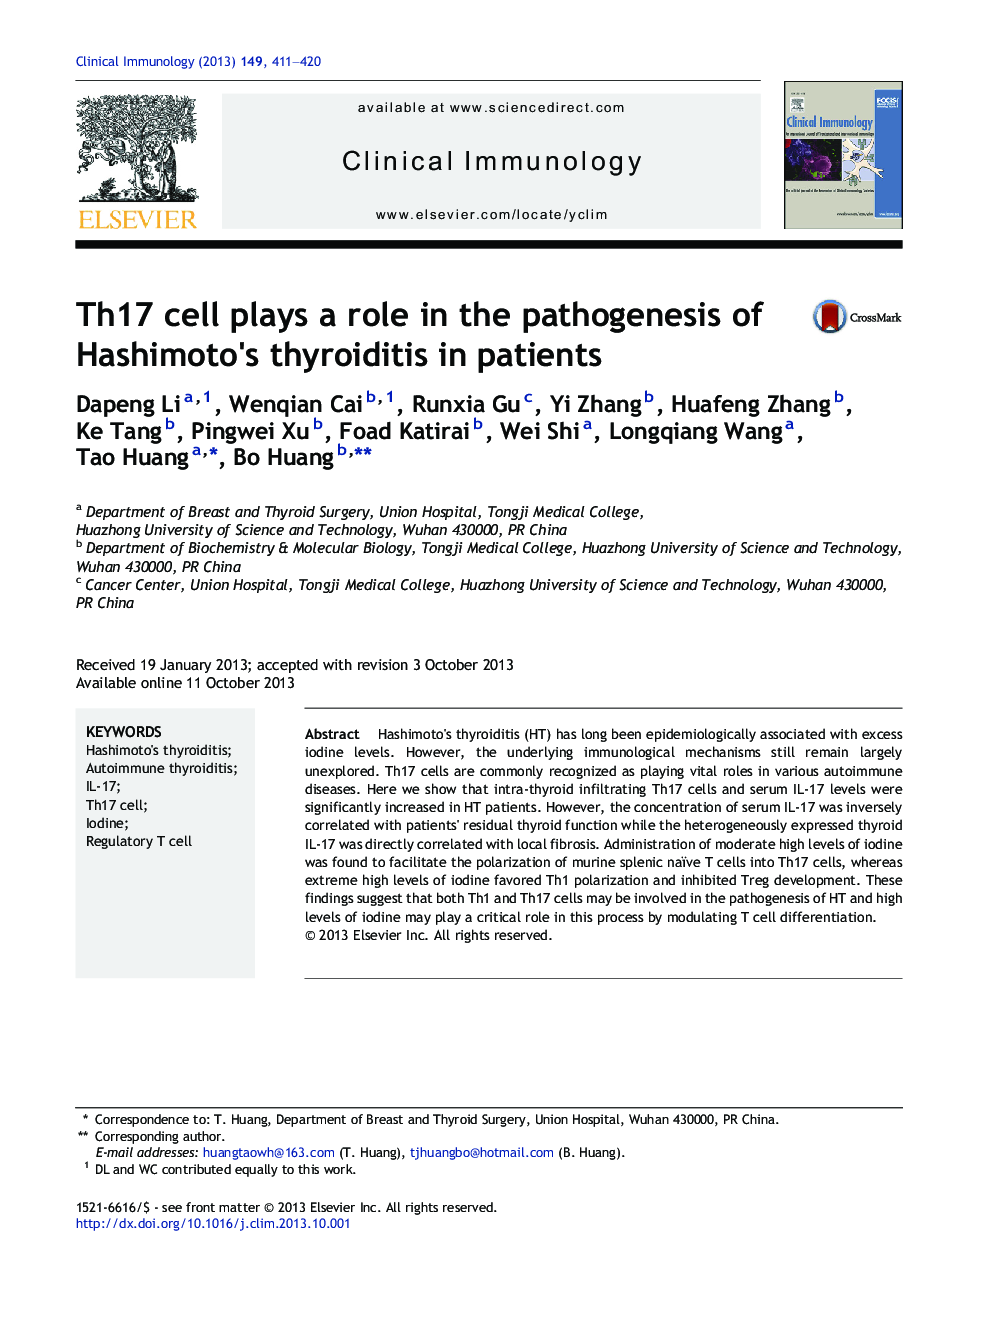 Th17 cell plays a role in the pathogenesis of Hashimoto's thyroiditis in patients